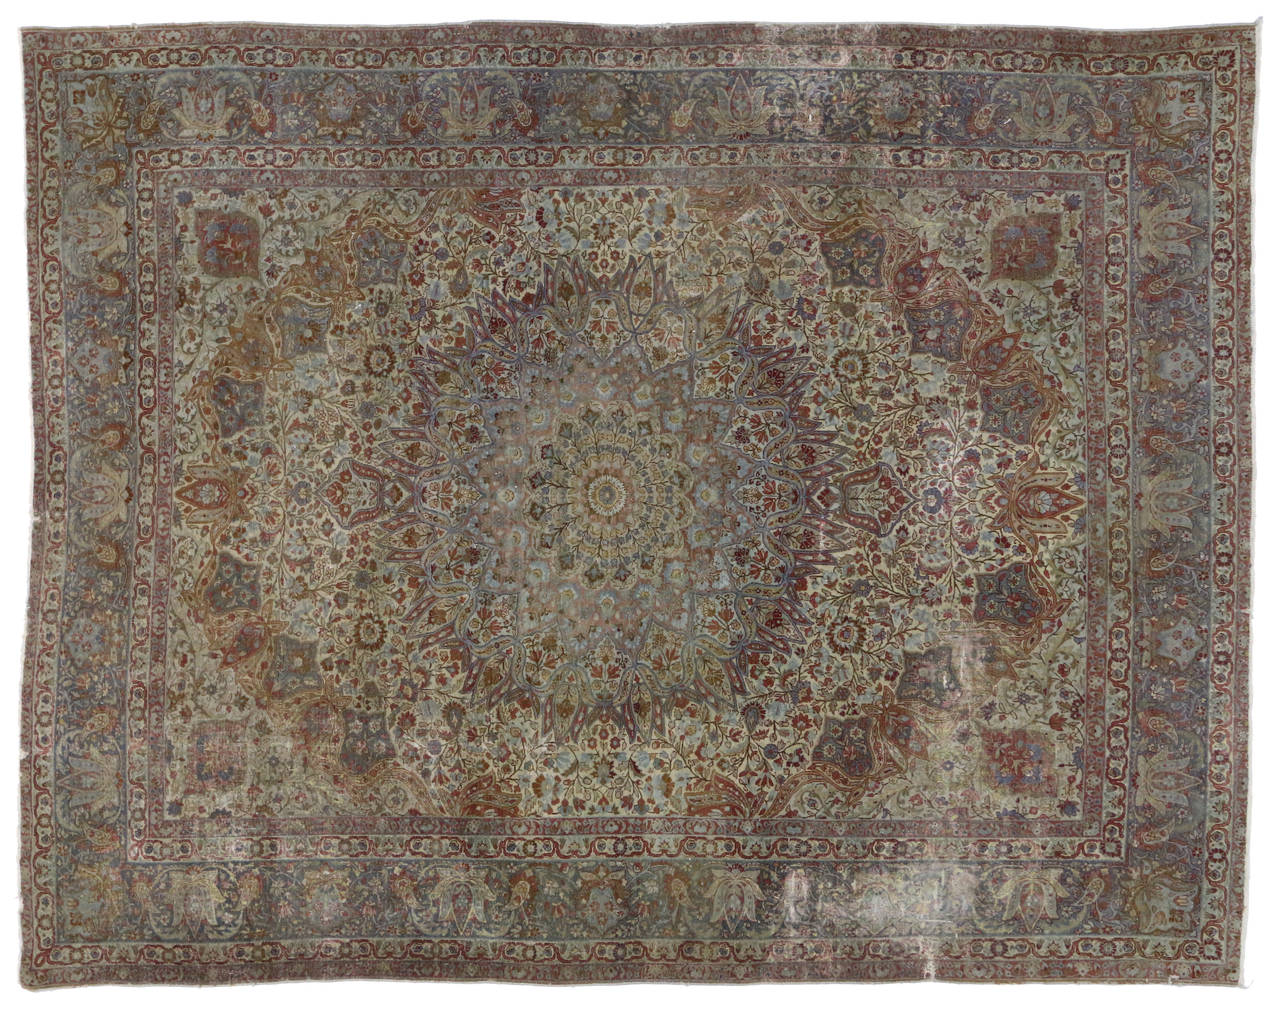 This Late 19th century Persian Kerman (Kirman) features a grand scale center medallion with delicately colored floral and botanical motifs and sweeping vines meander across the field creating an overall luxurious design scheme. Decorative palmettes